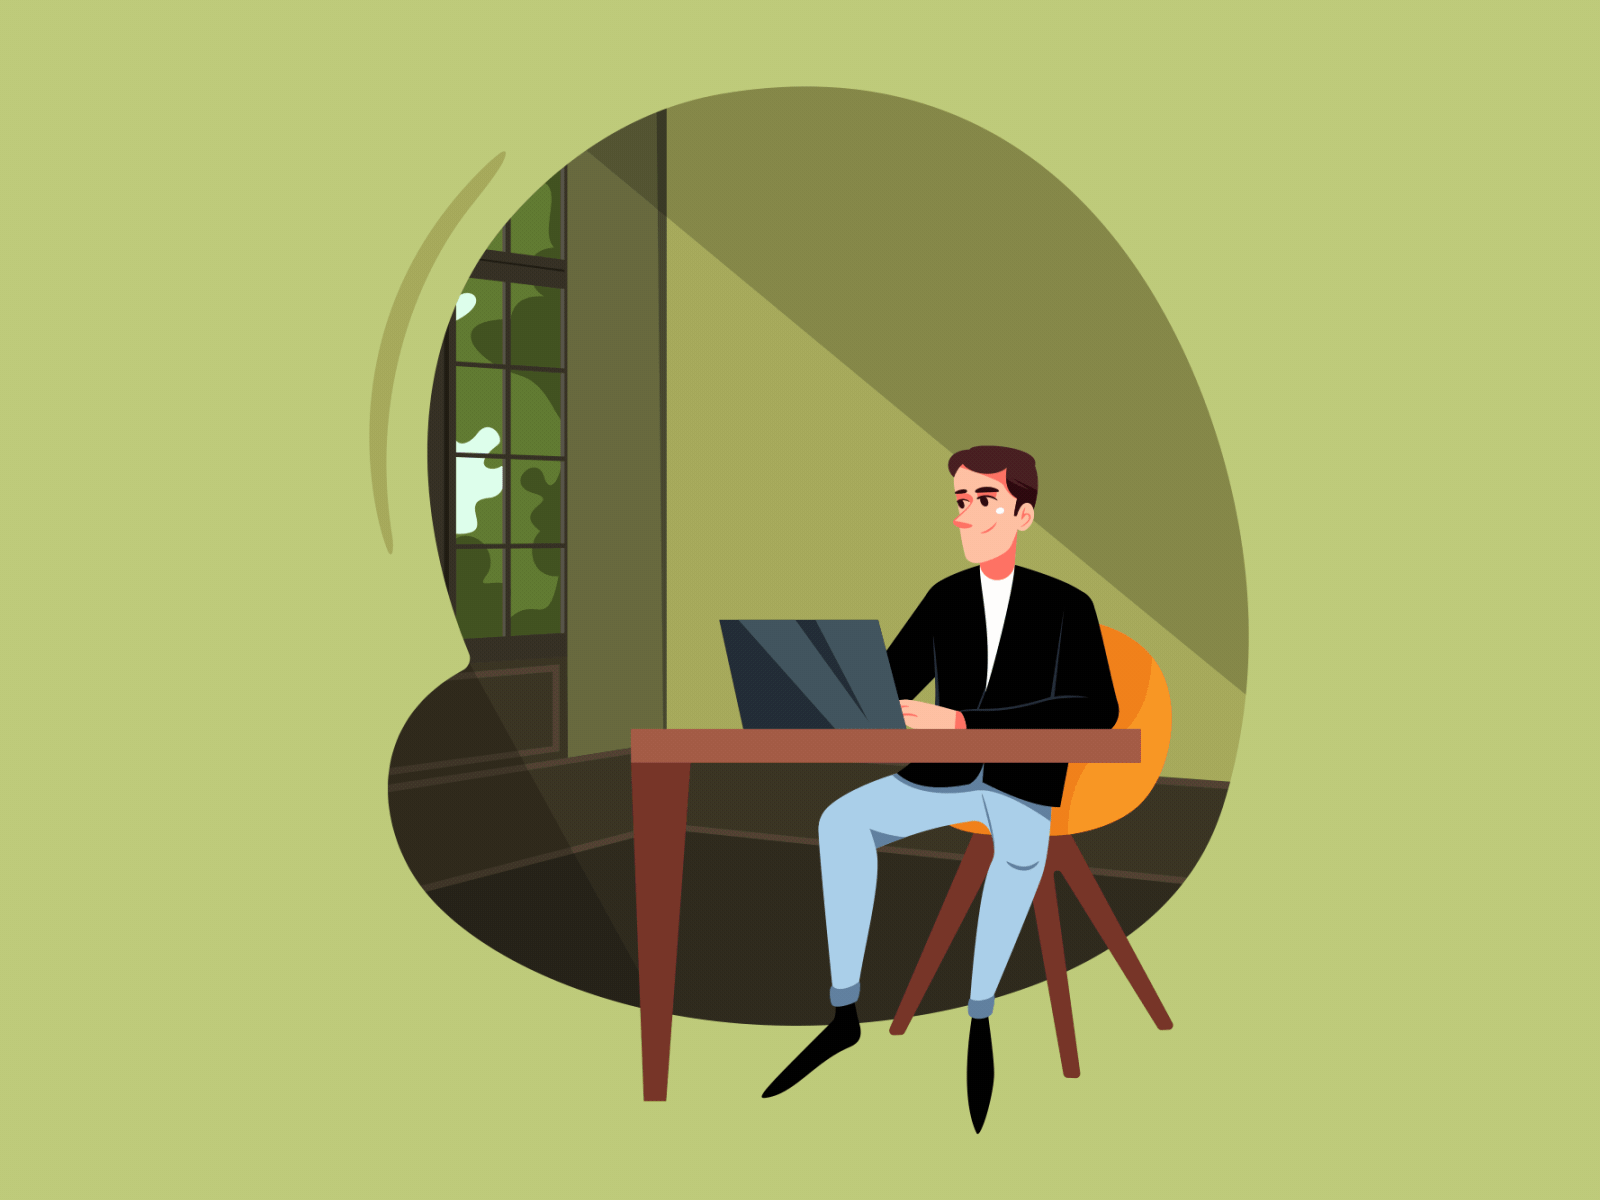 Man works on his laptop at his desk at home 2d animation freelance home home office illustration interior mansitting motion graphics open laptop remote remote job room sitting stay home typing work working process workspace writer